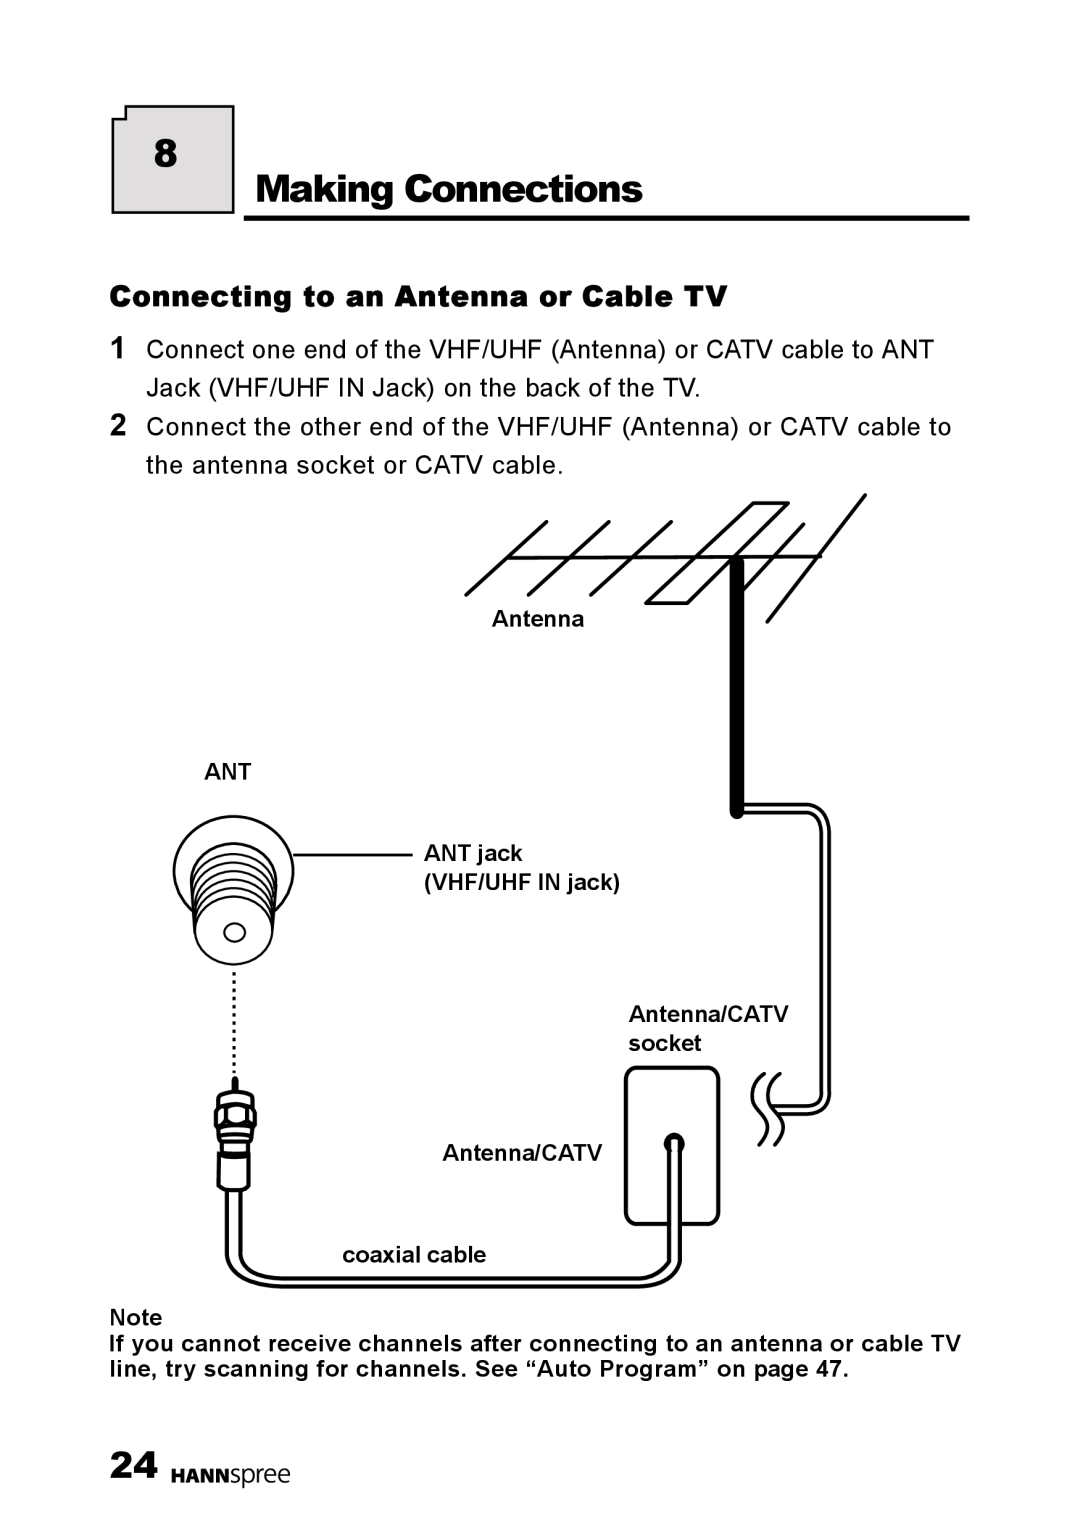 HANNspree HANNSz.crab user manual Making Connections, Connecting to an Antenna or Cable TV 